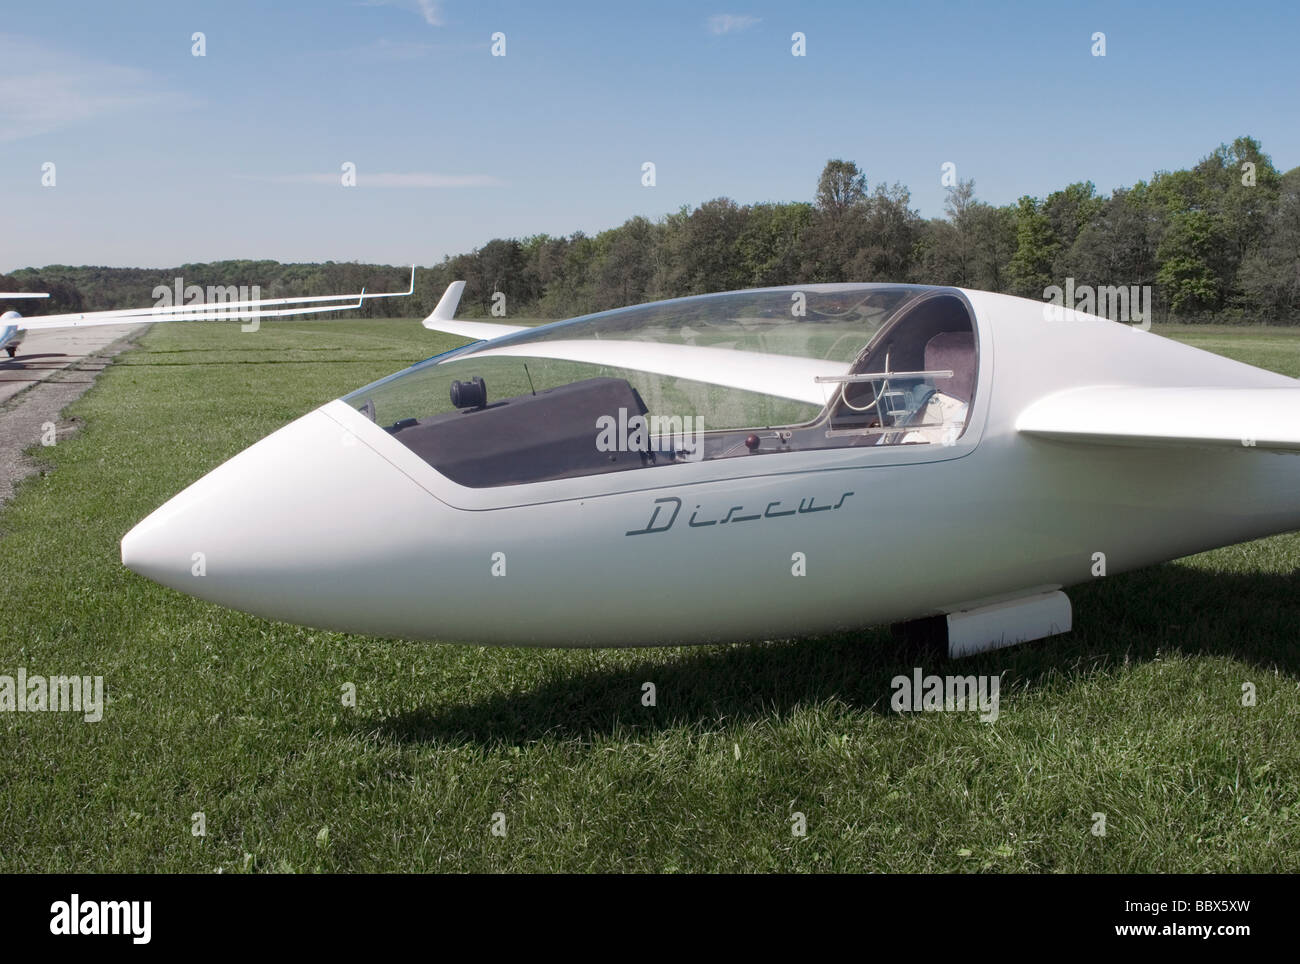 sailplane or Glider at rest on an airfield Stock Photo